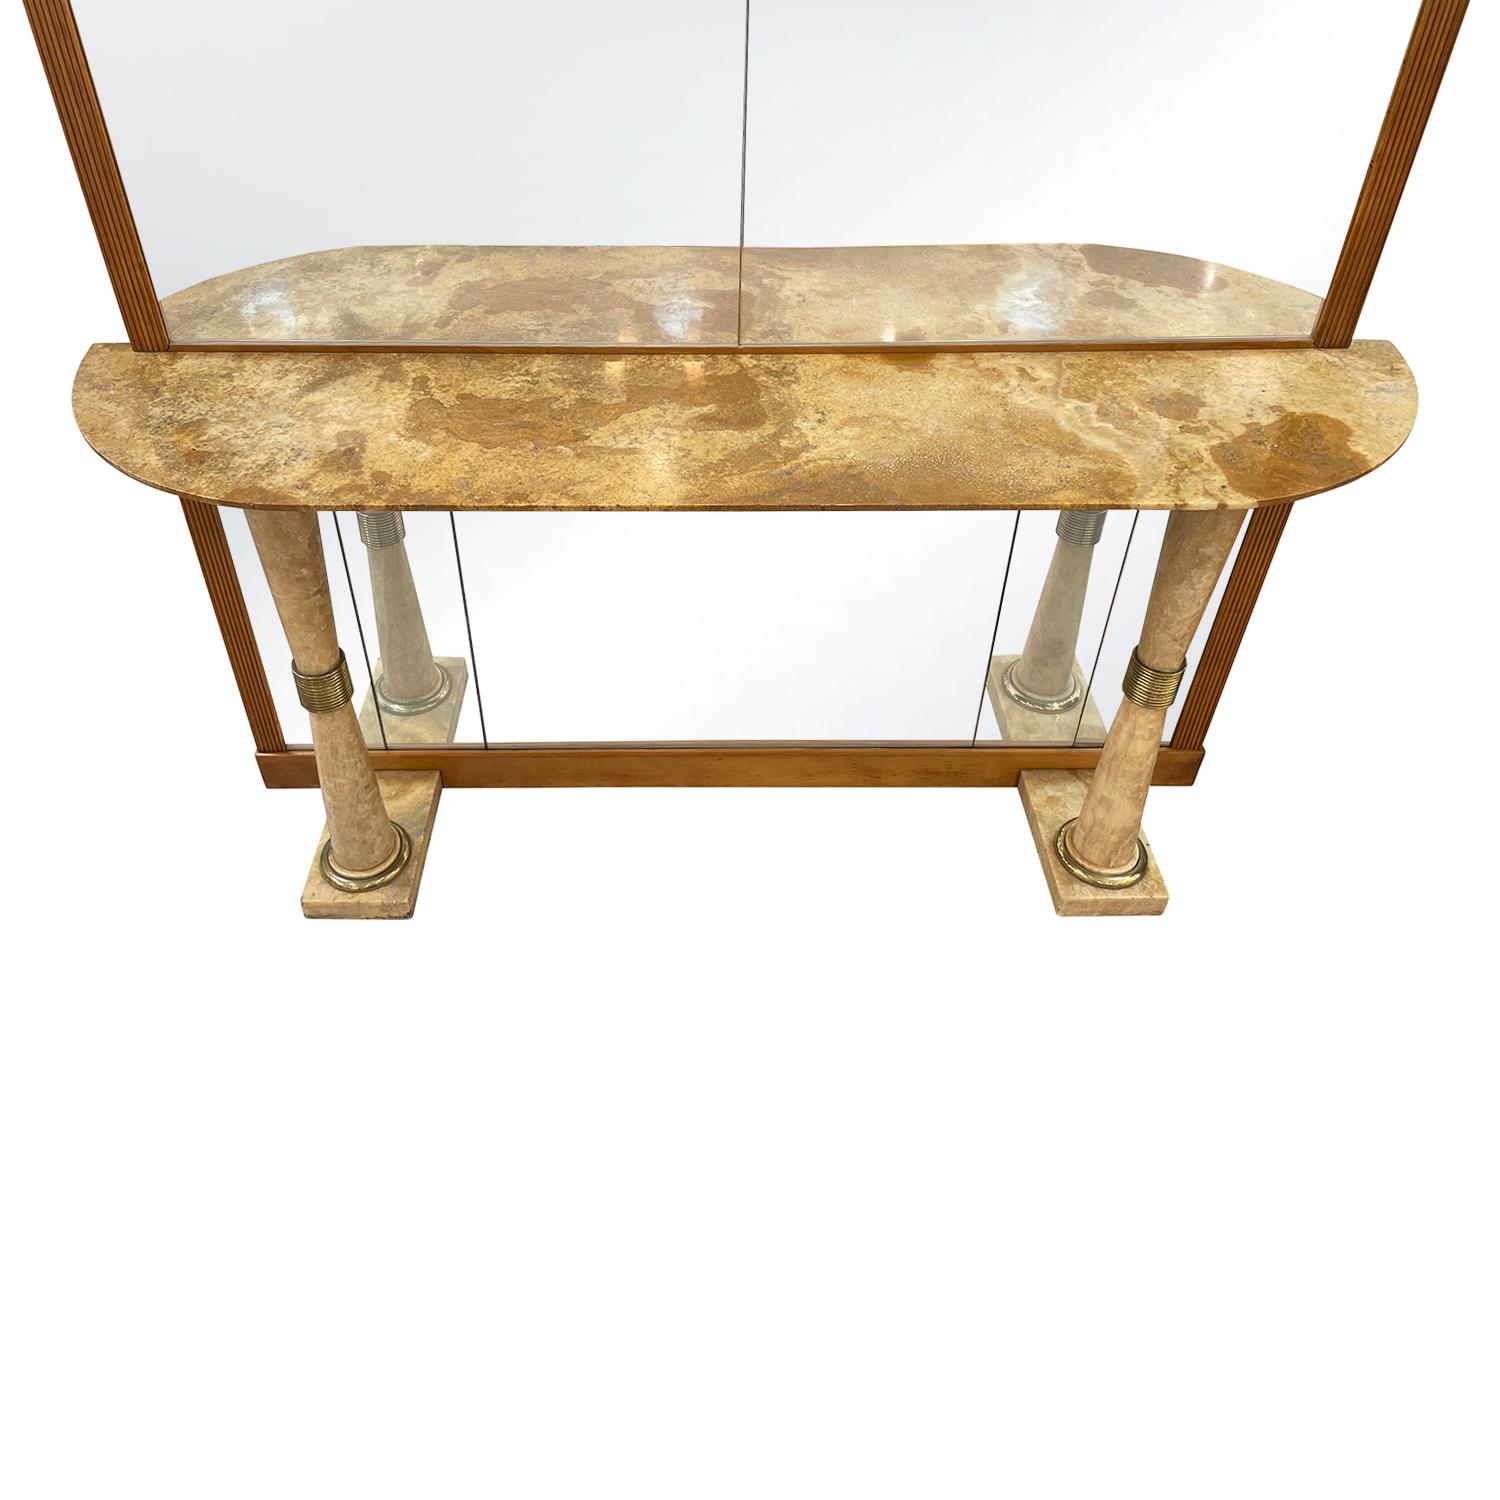 Metal 20th Century Italian Mid-Century Modern Marble Console Table & Glass Wall Mirror For Sale